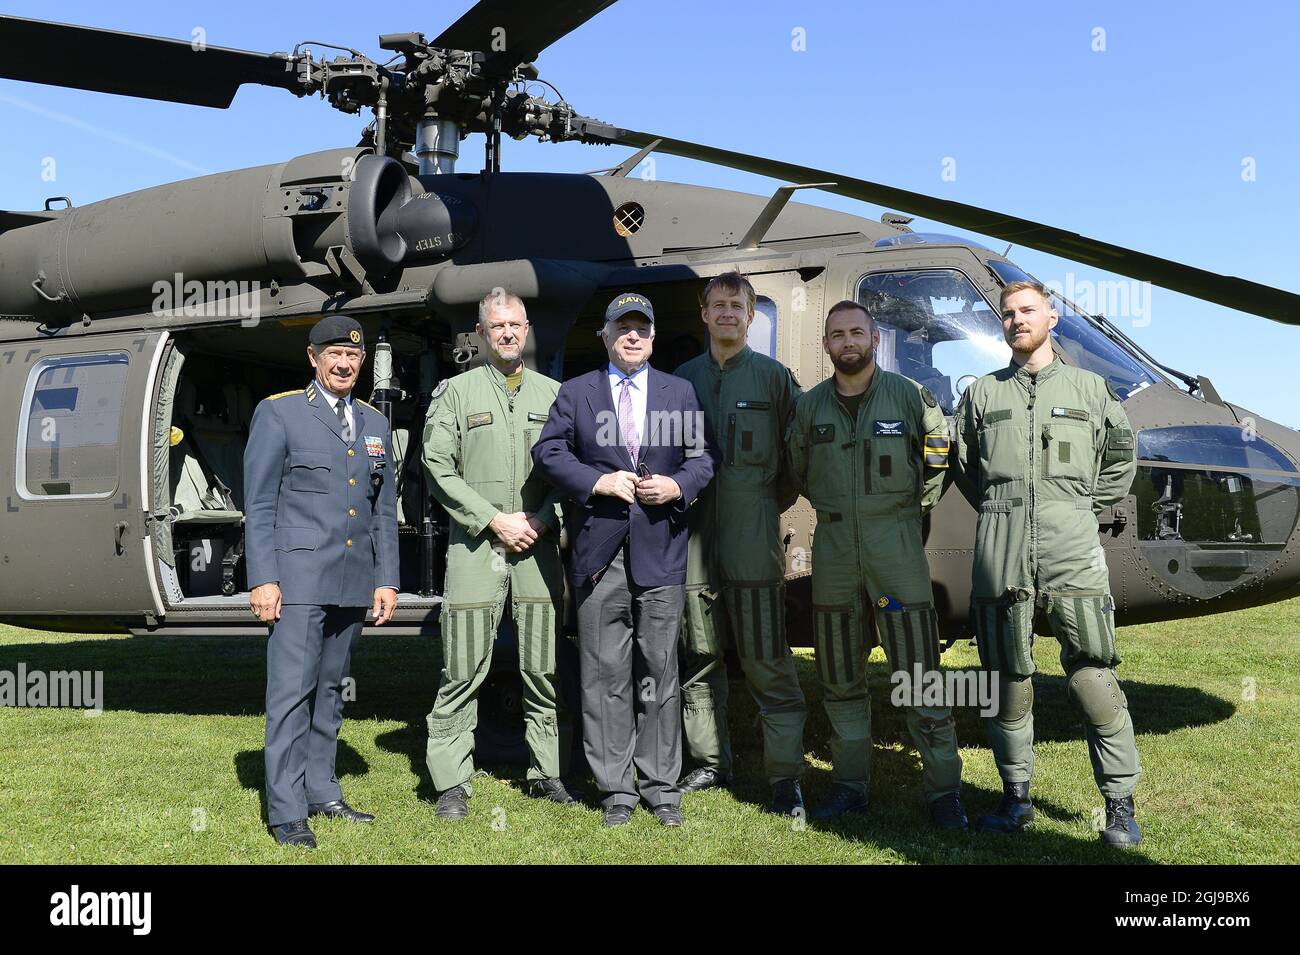 STOCKHOLM 2015-08-19 US Senator John McCain (C) and Supreme commander of the Swedish Armed Forces Sverker Goranson (L) pose for a photo with the crew of a Swedish Black Hawk helicopter at the Gardet Park in Stockholm, Sweden, August 19, 2015, before taking-off for a flight to the Berga Naval base. McCain visited Sweden together with senators John Barrasso (R) and Sheldon Whitehouse (D) Wednesday to discuss the US/Swedish defence cooperation. Photo: Anders Wiklund / TT / Kod 10040  Stock Photo